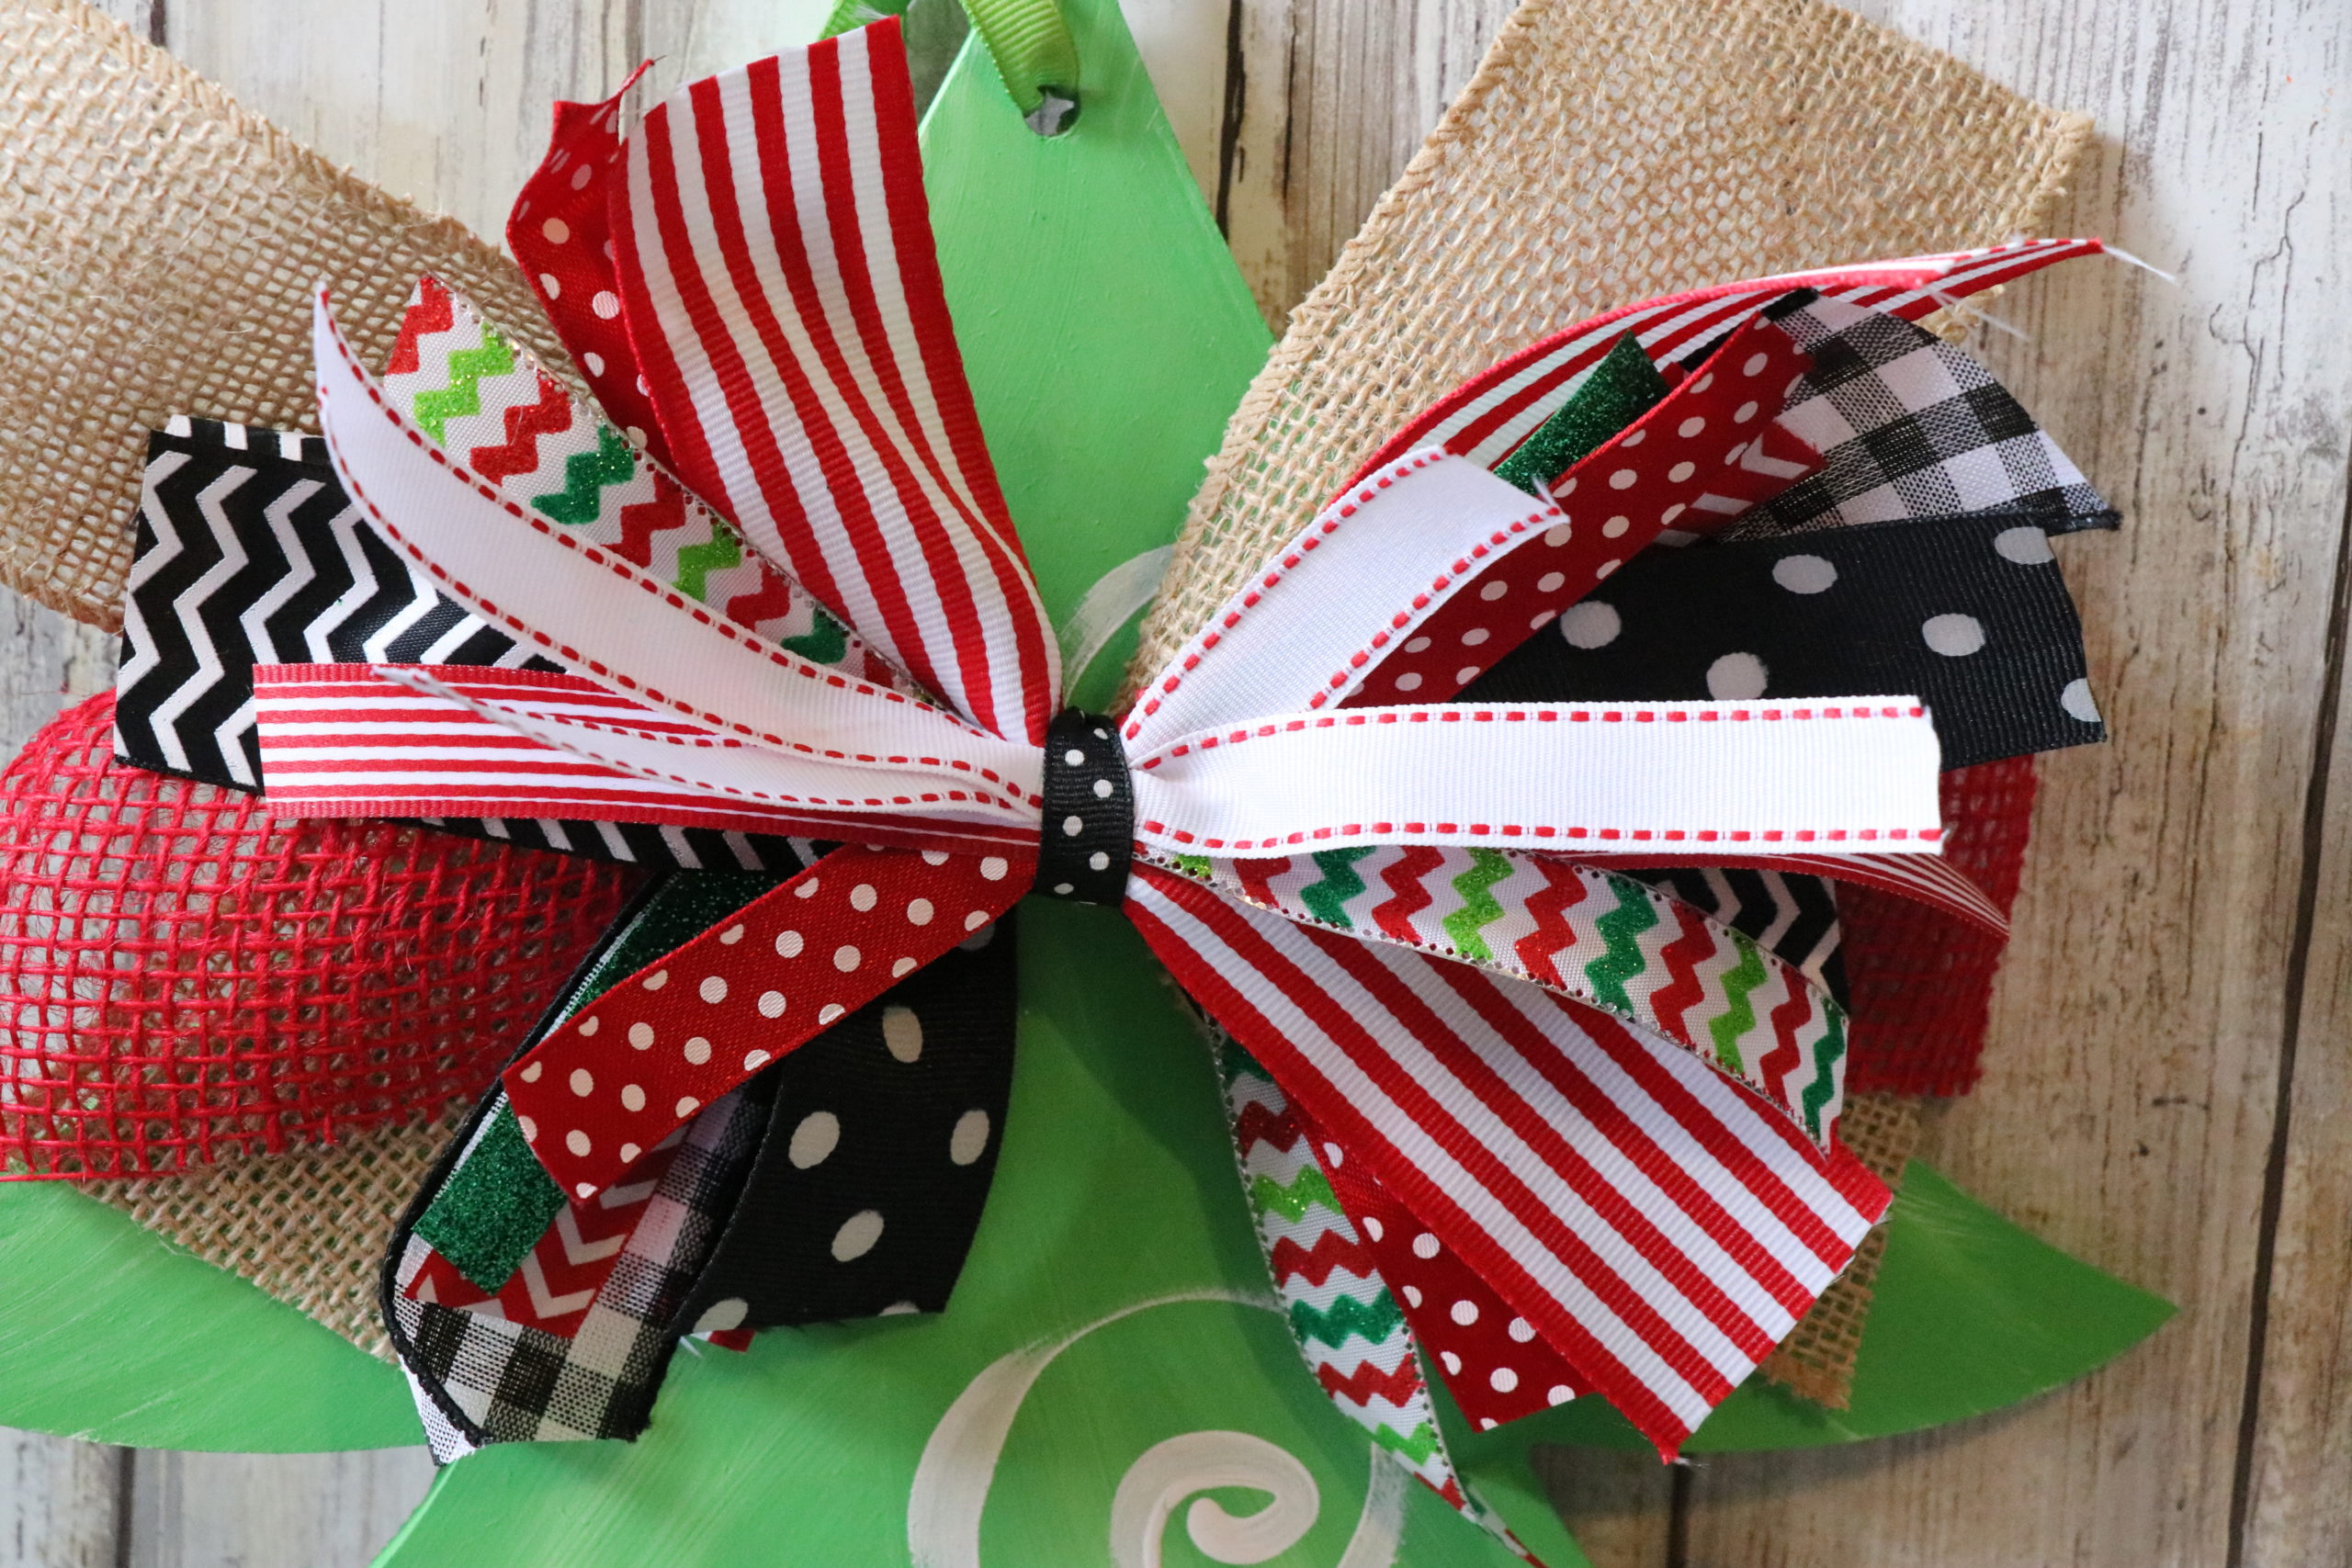 CHRISTMAS BOWS FOR PRESENTS DIY USING LEFTOVER RIBBON FROM DOLLAR